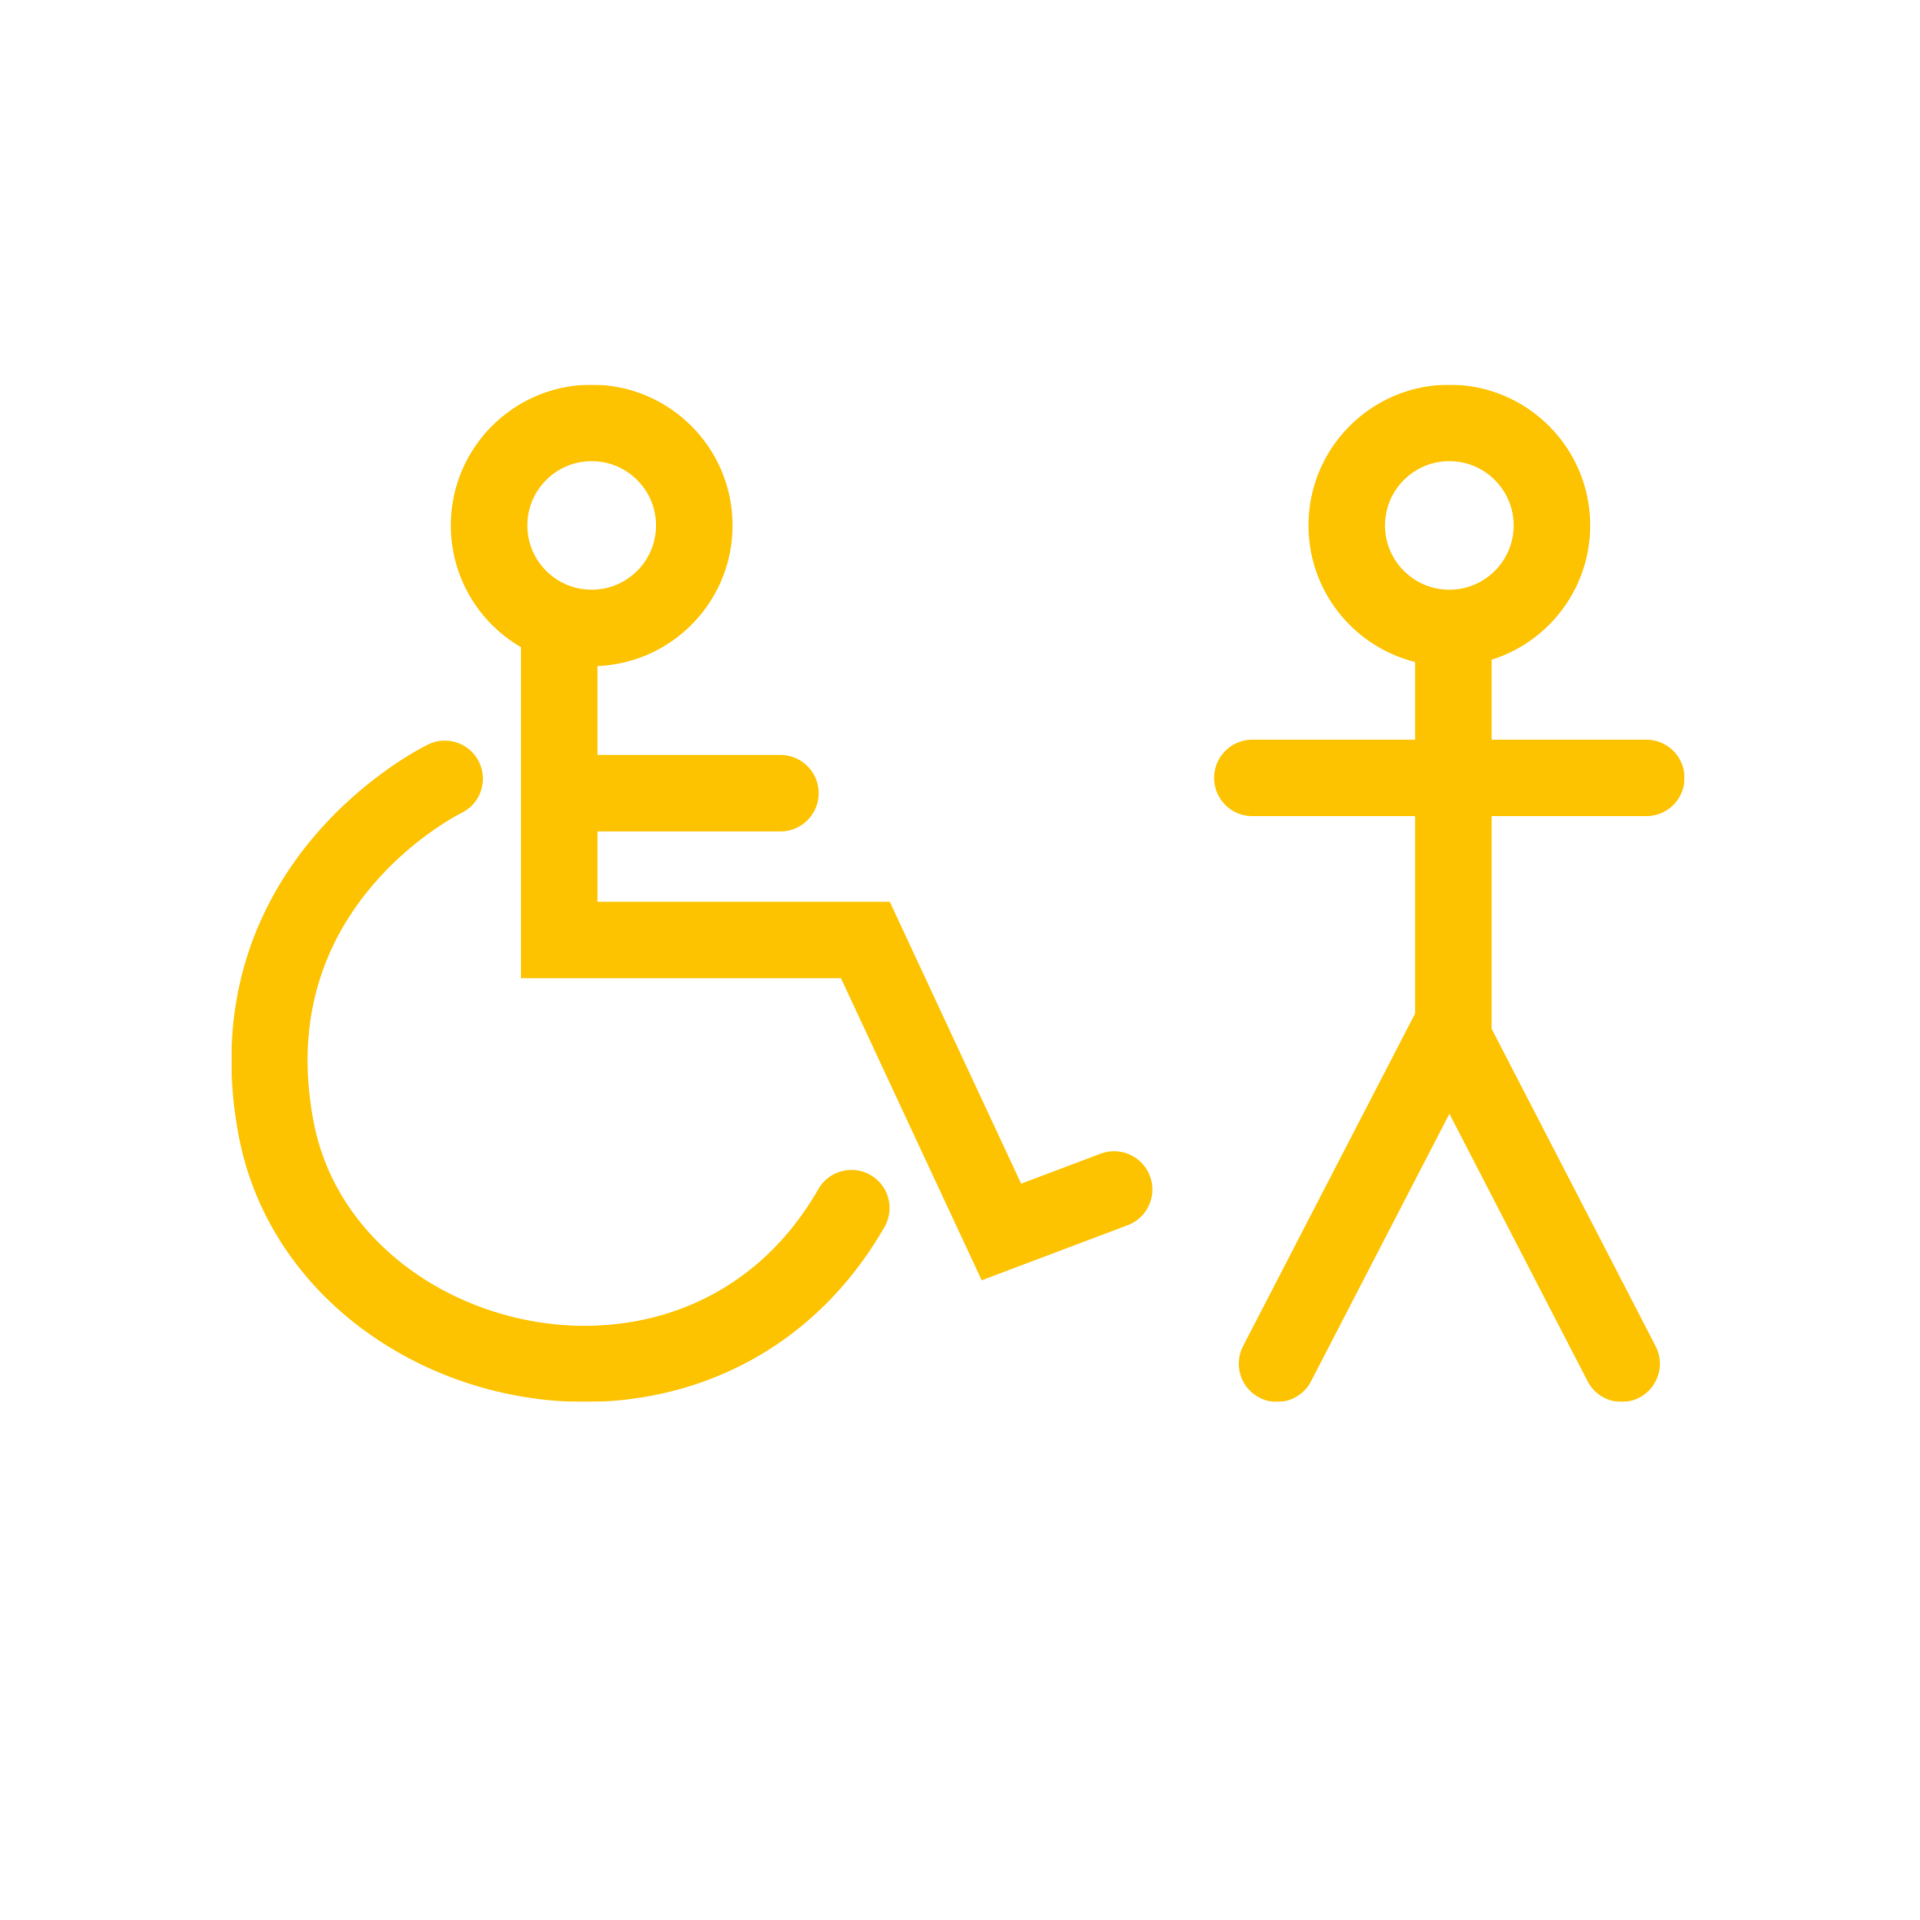 An icon showing Nell Bank has full wheelchair access for all their eductaion programmes